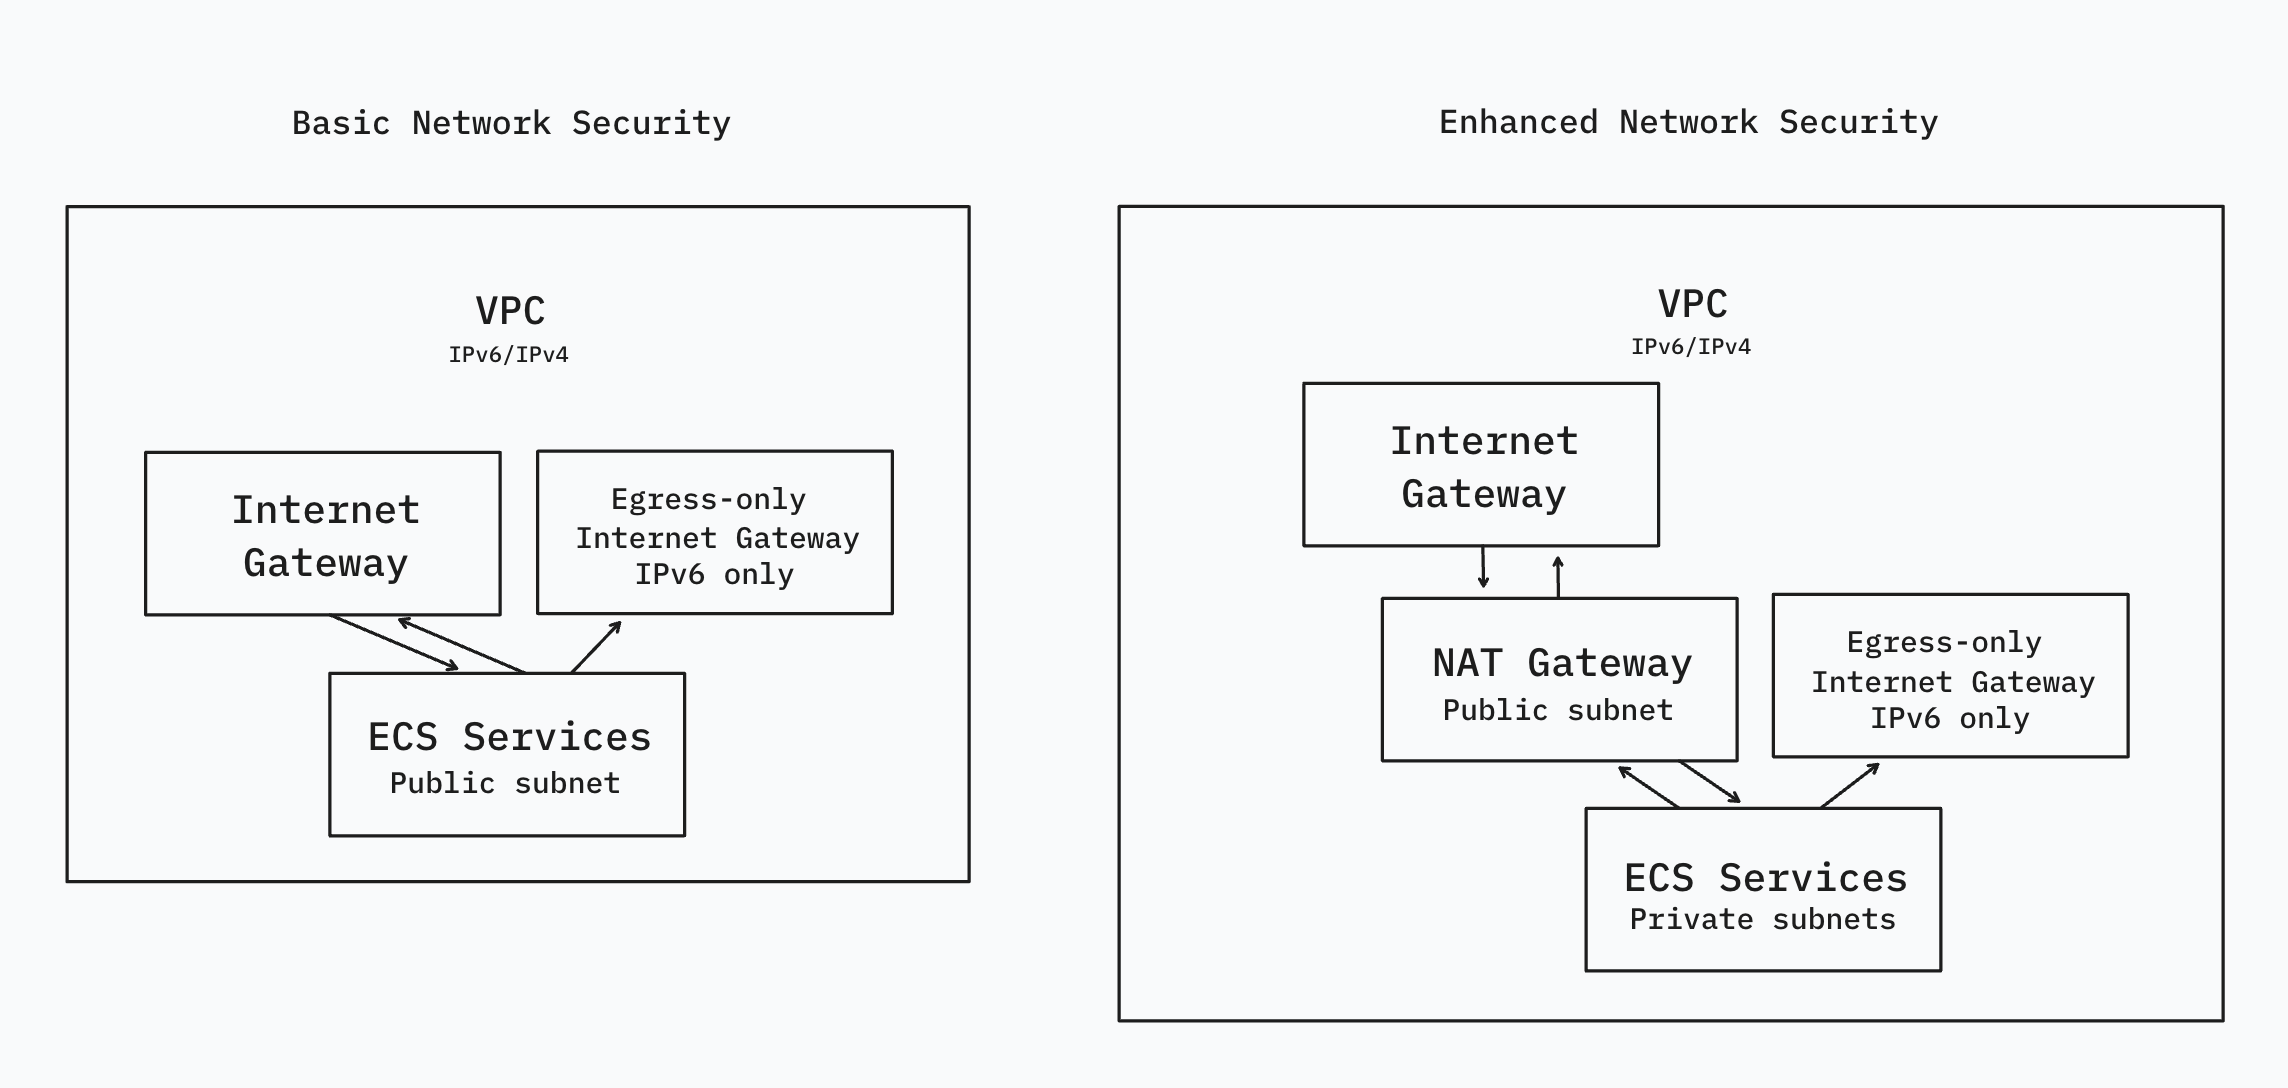 A diagram displaying the difference between basic and enhanced network security models